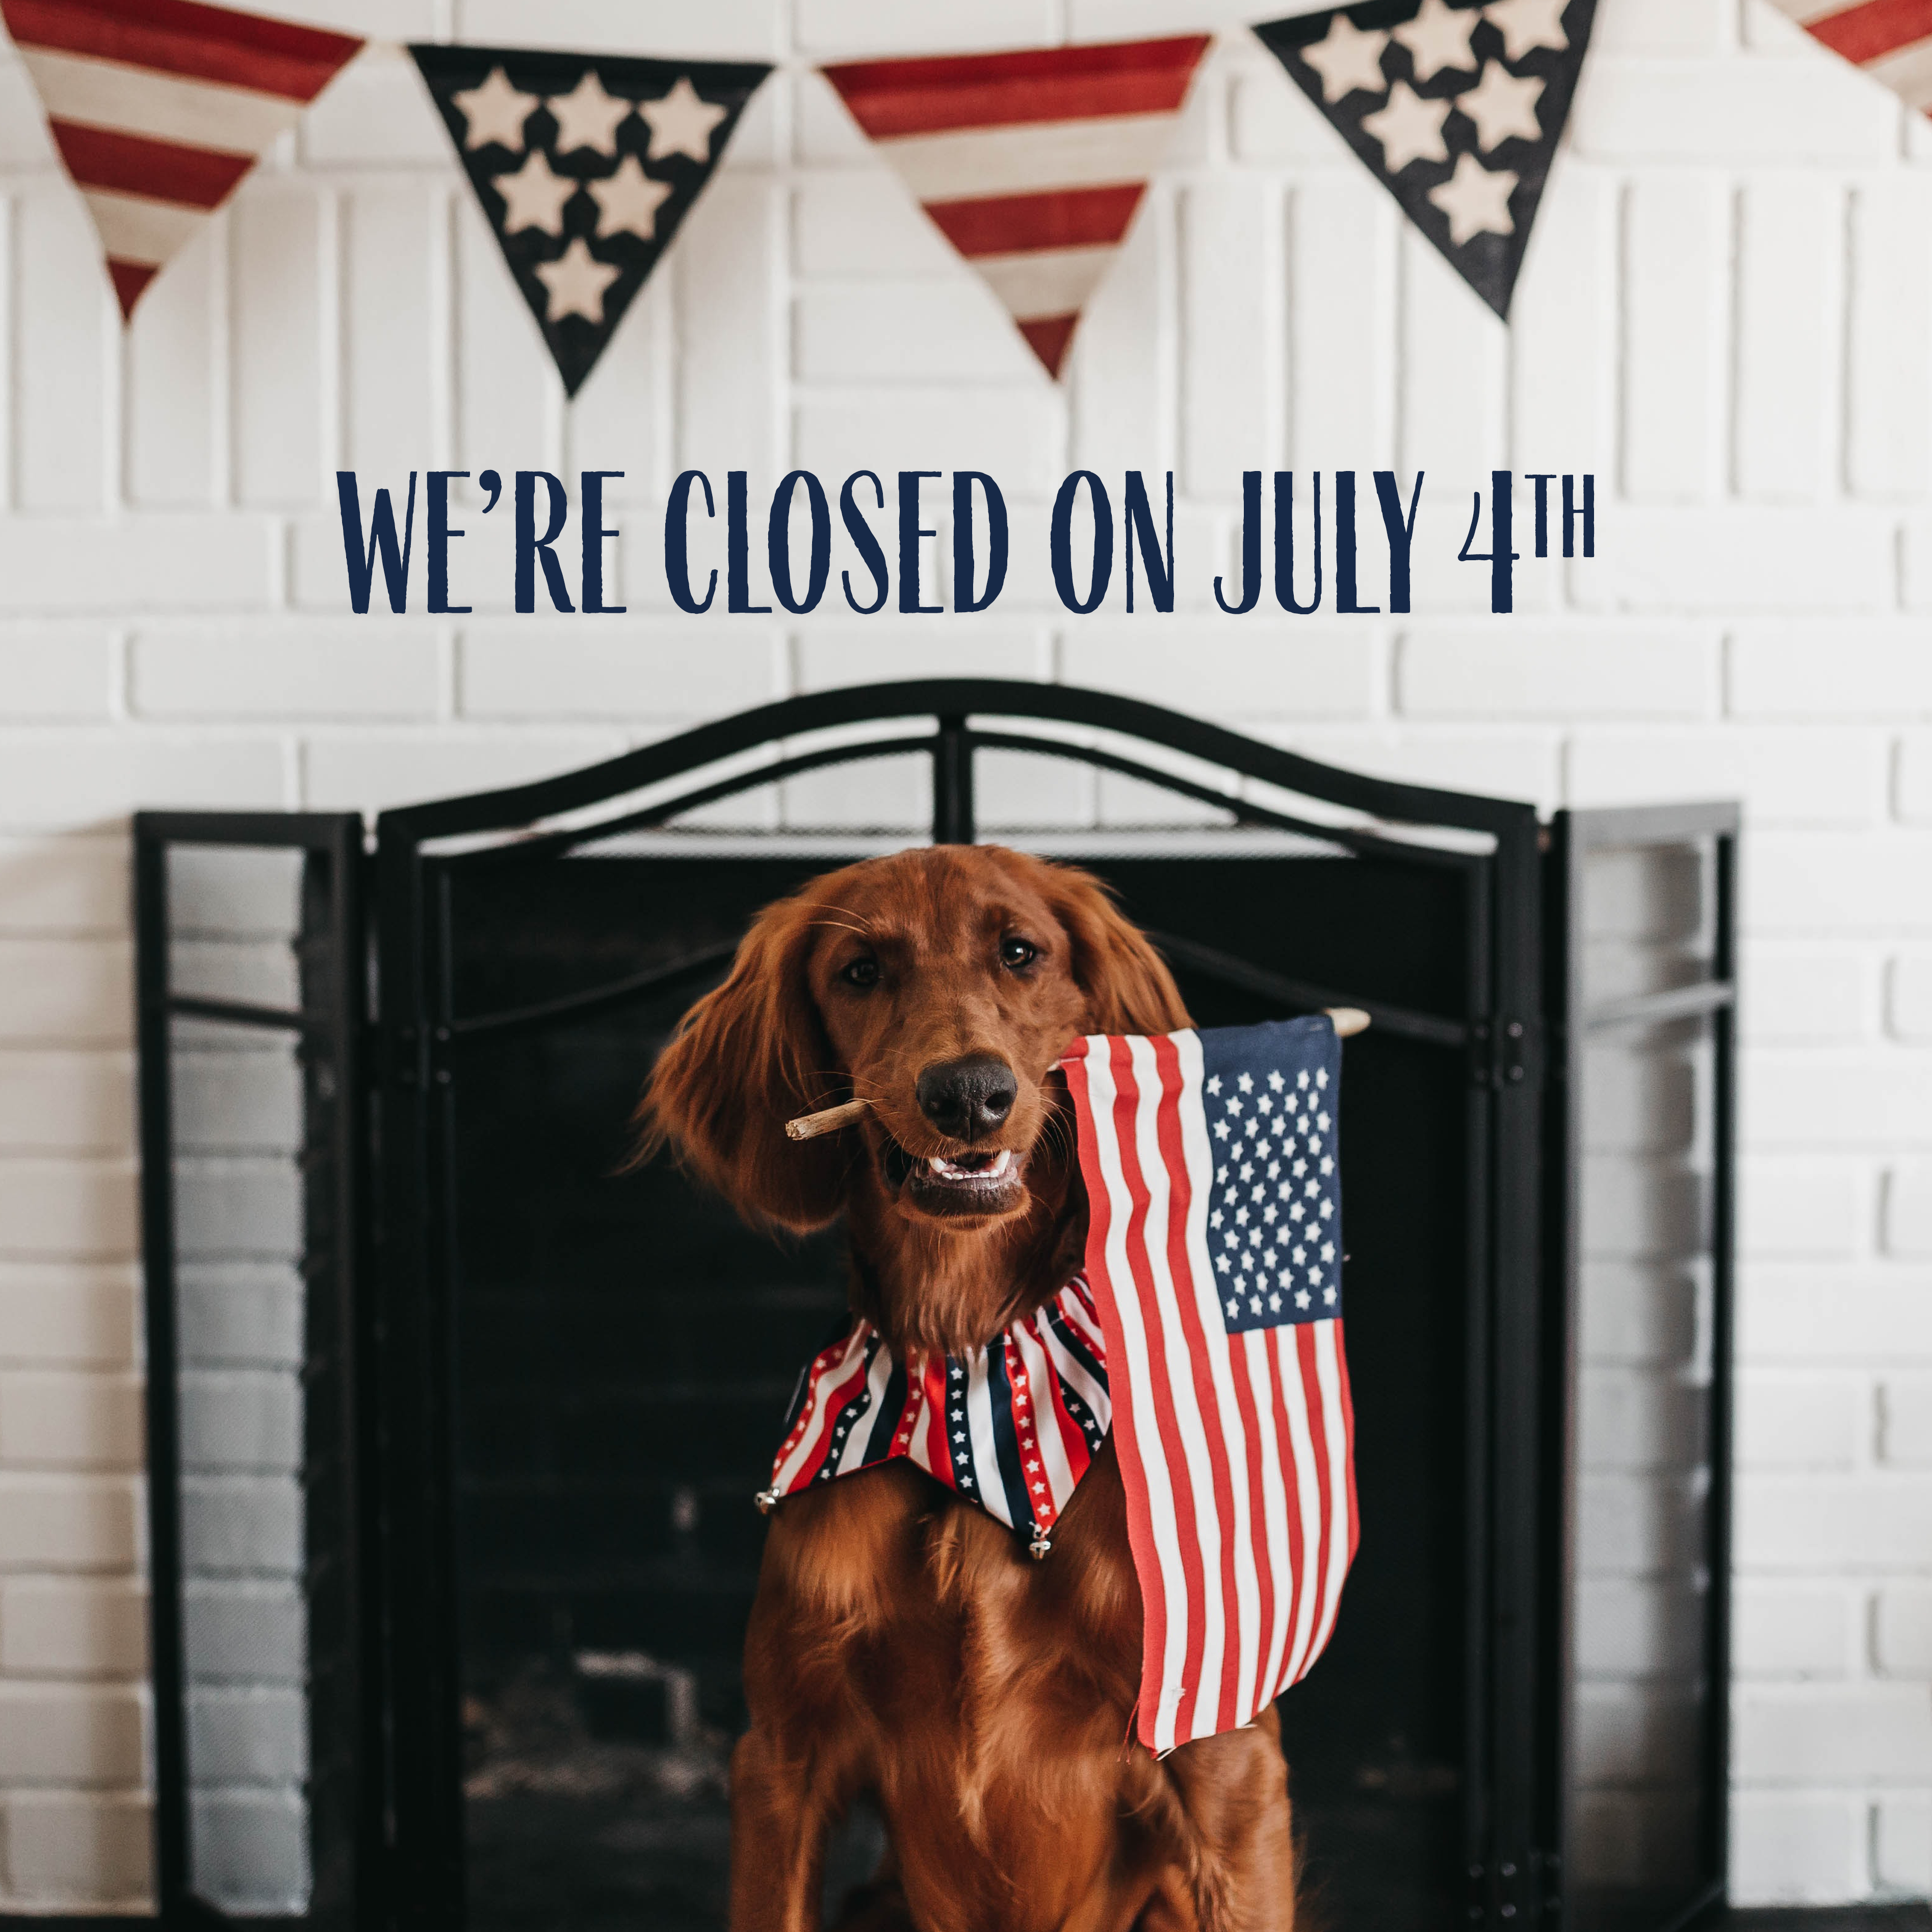 Closed for the 4th of July